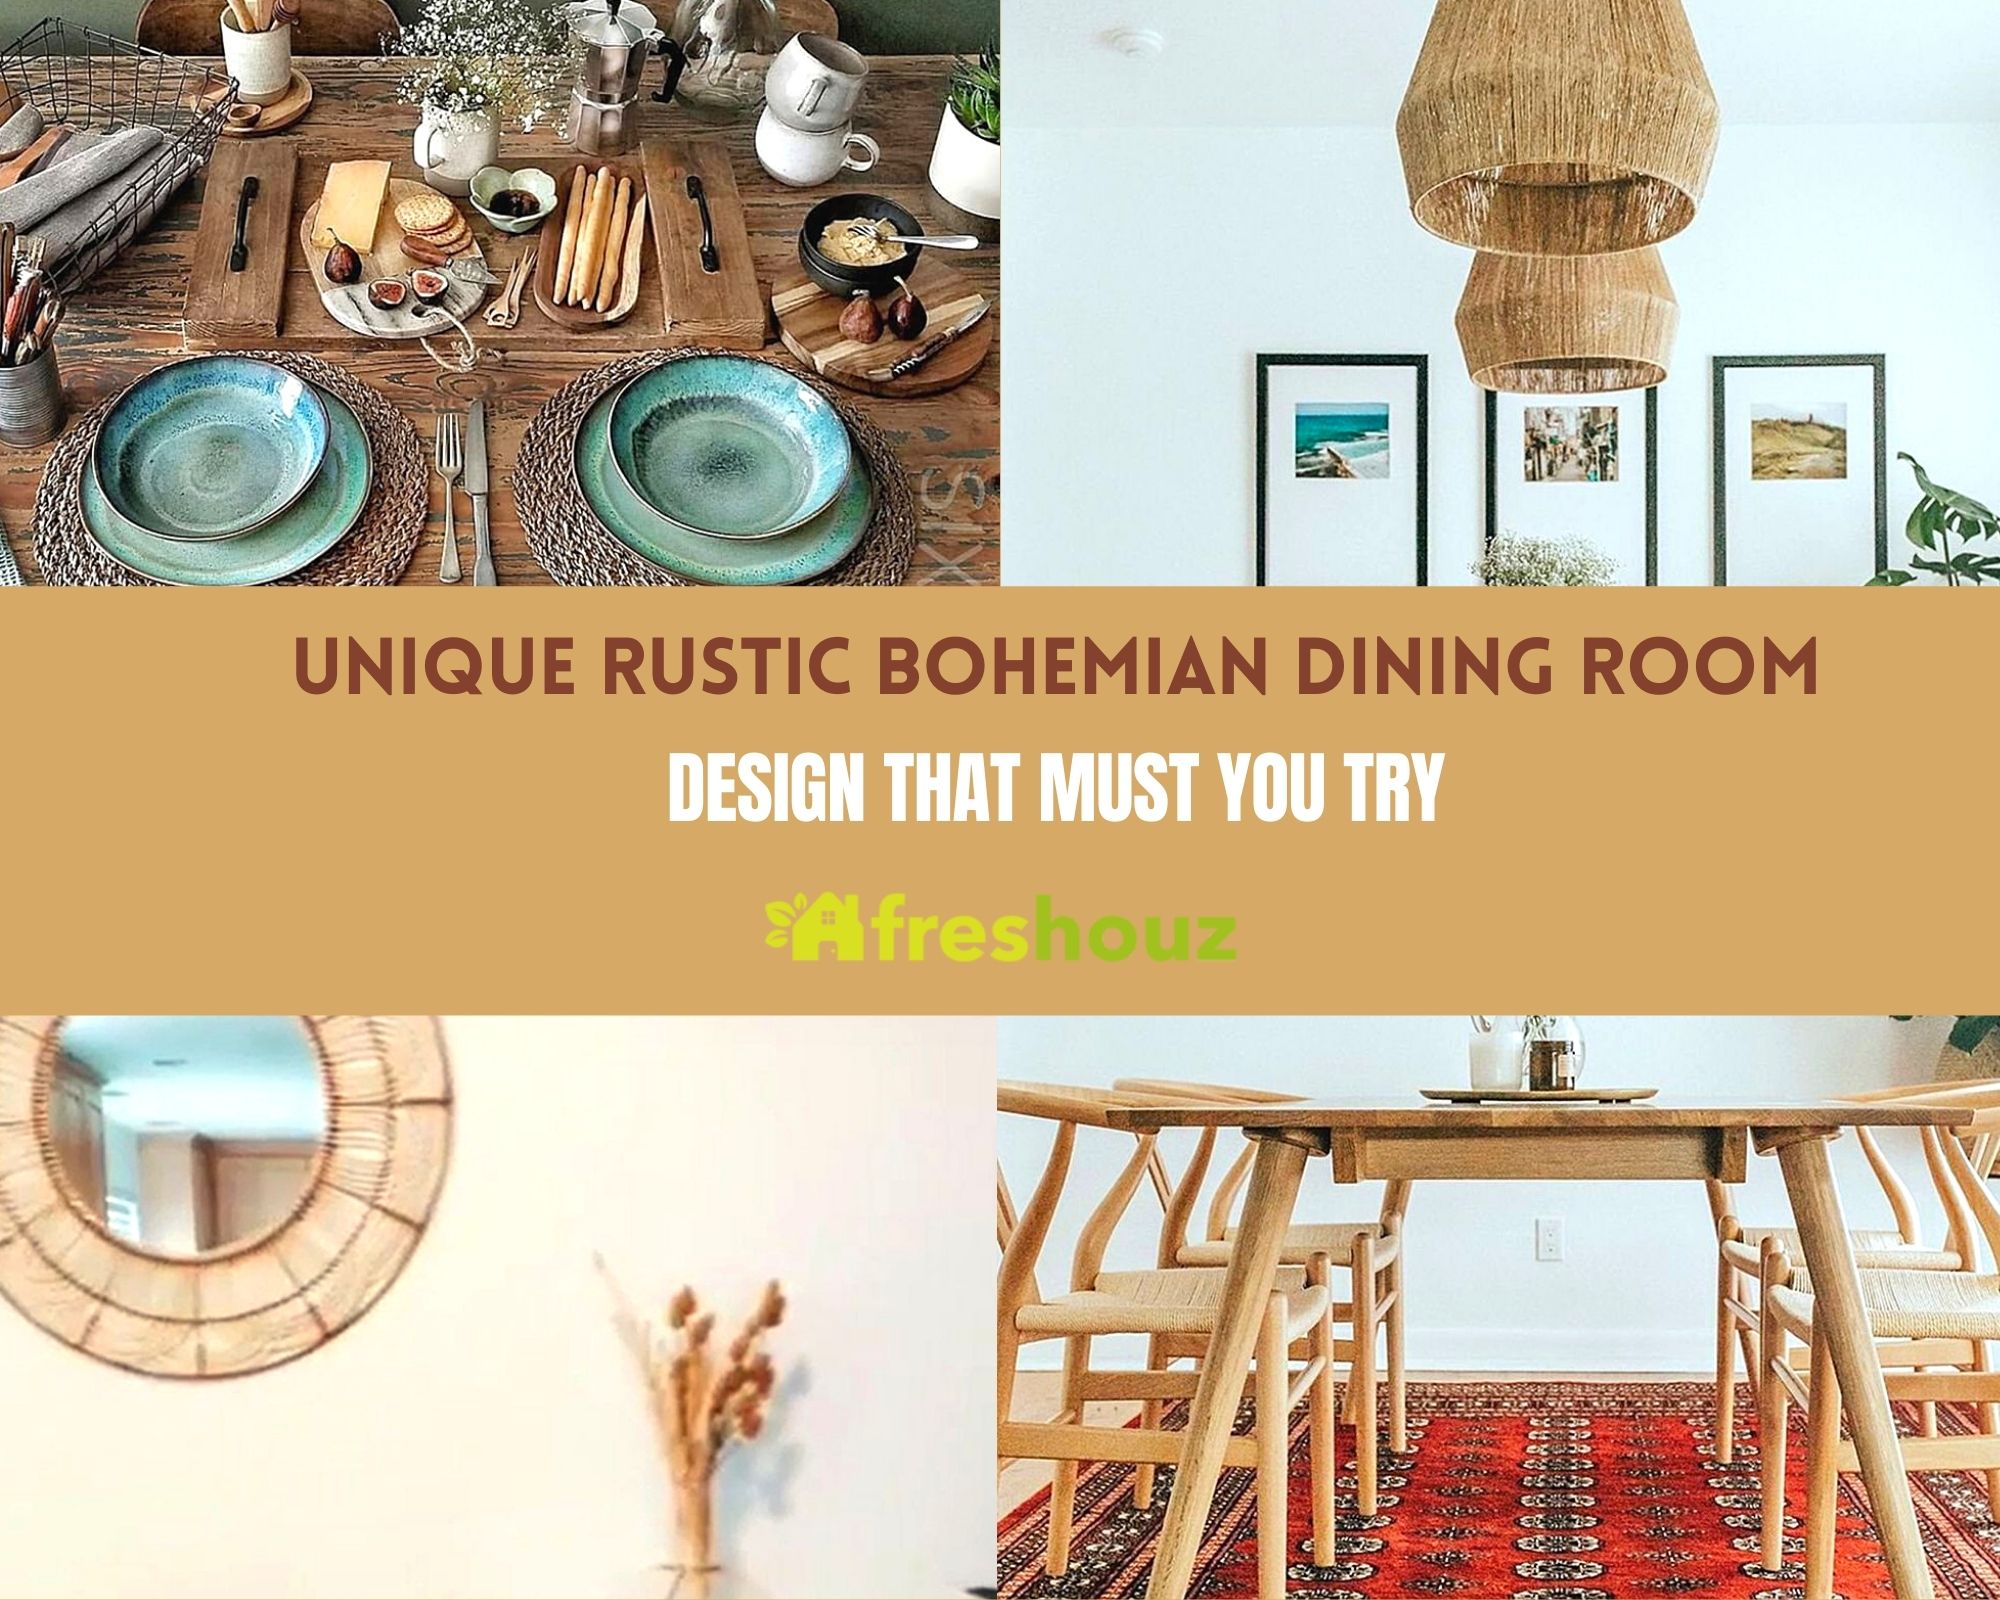 Unique Rustic Bohemian Dining Room Design That Must You Try